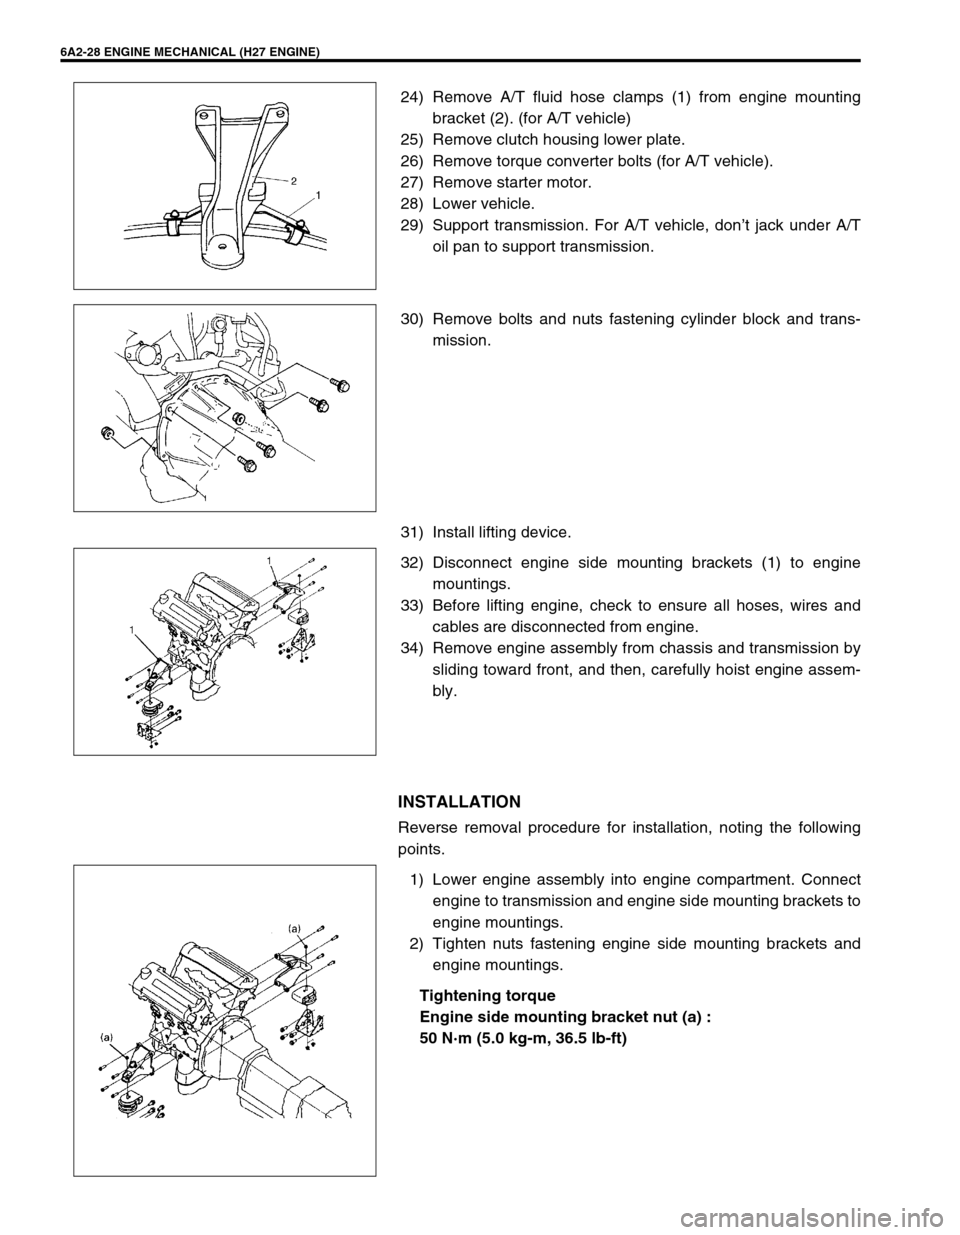 SUZUKI GRAND VITARA 1999 2.G Service Manual 6A2-28 ENGINE MECHANICAL (H27 ENGINE)
24) Remove A/T fluid hose clamps (1) from engine mounting
bracket (2). (for A/T vehicle)
25) Remove clutch housing lower plate.
26) Remove torque converter bolts 